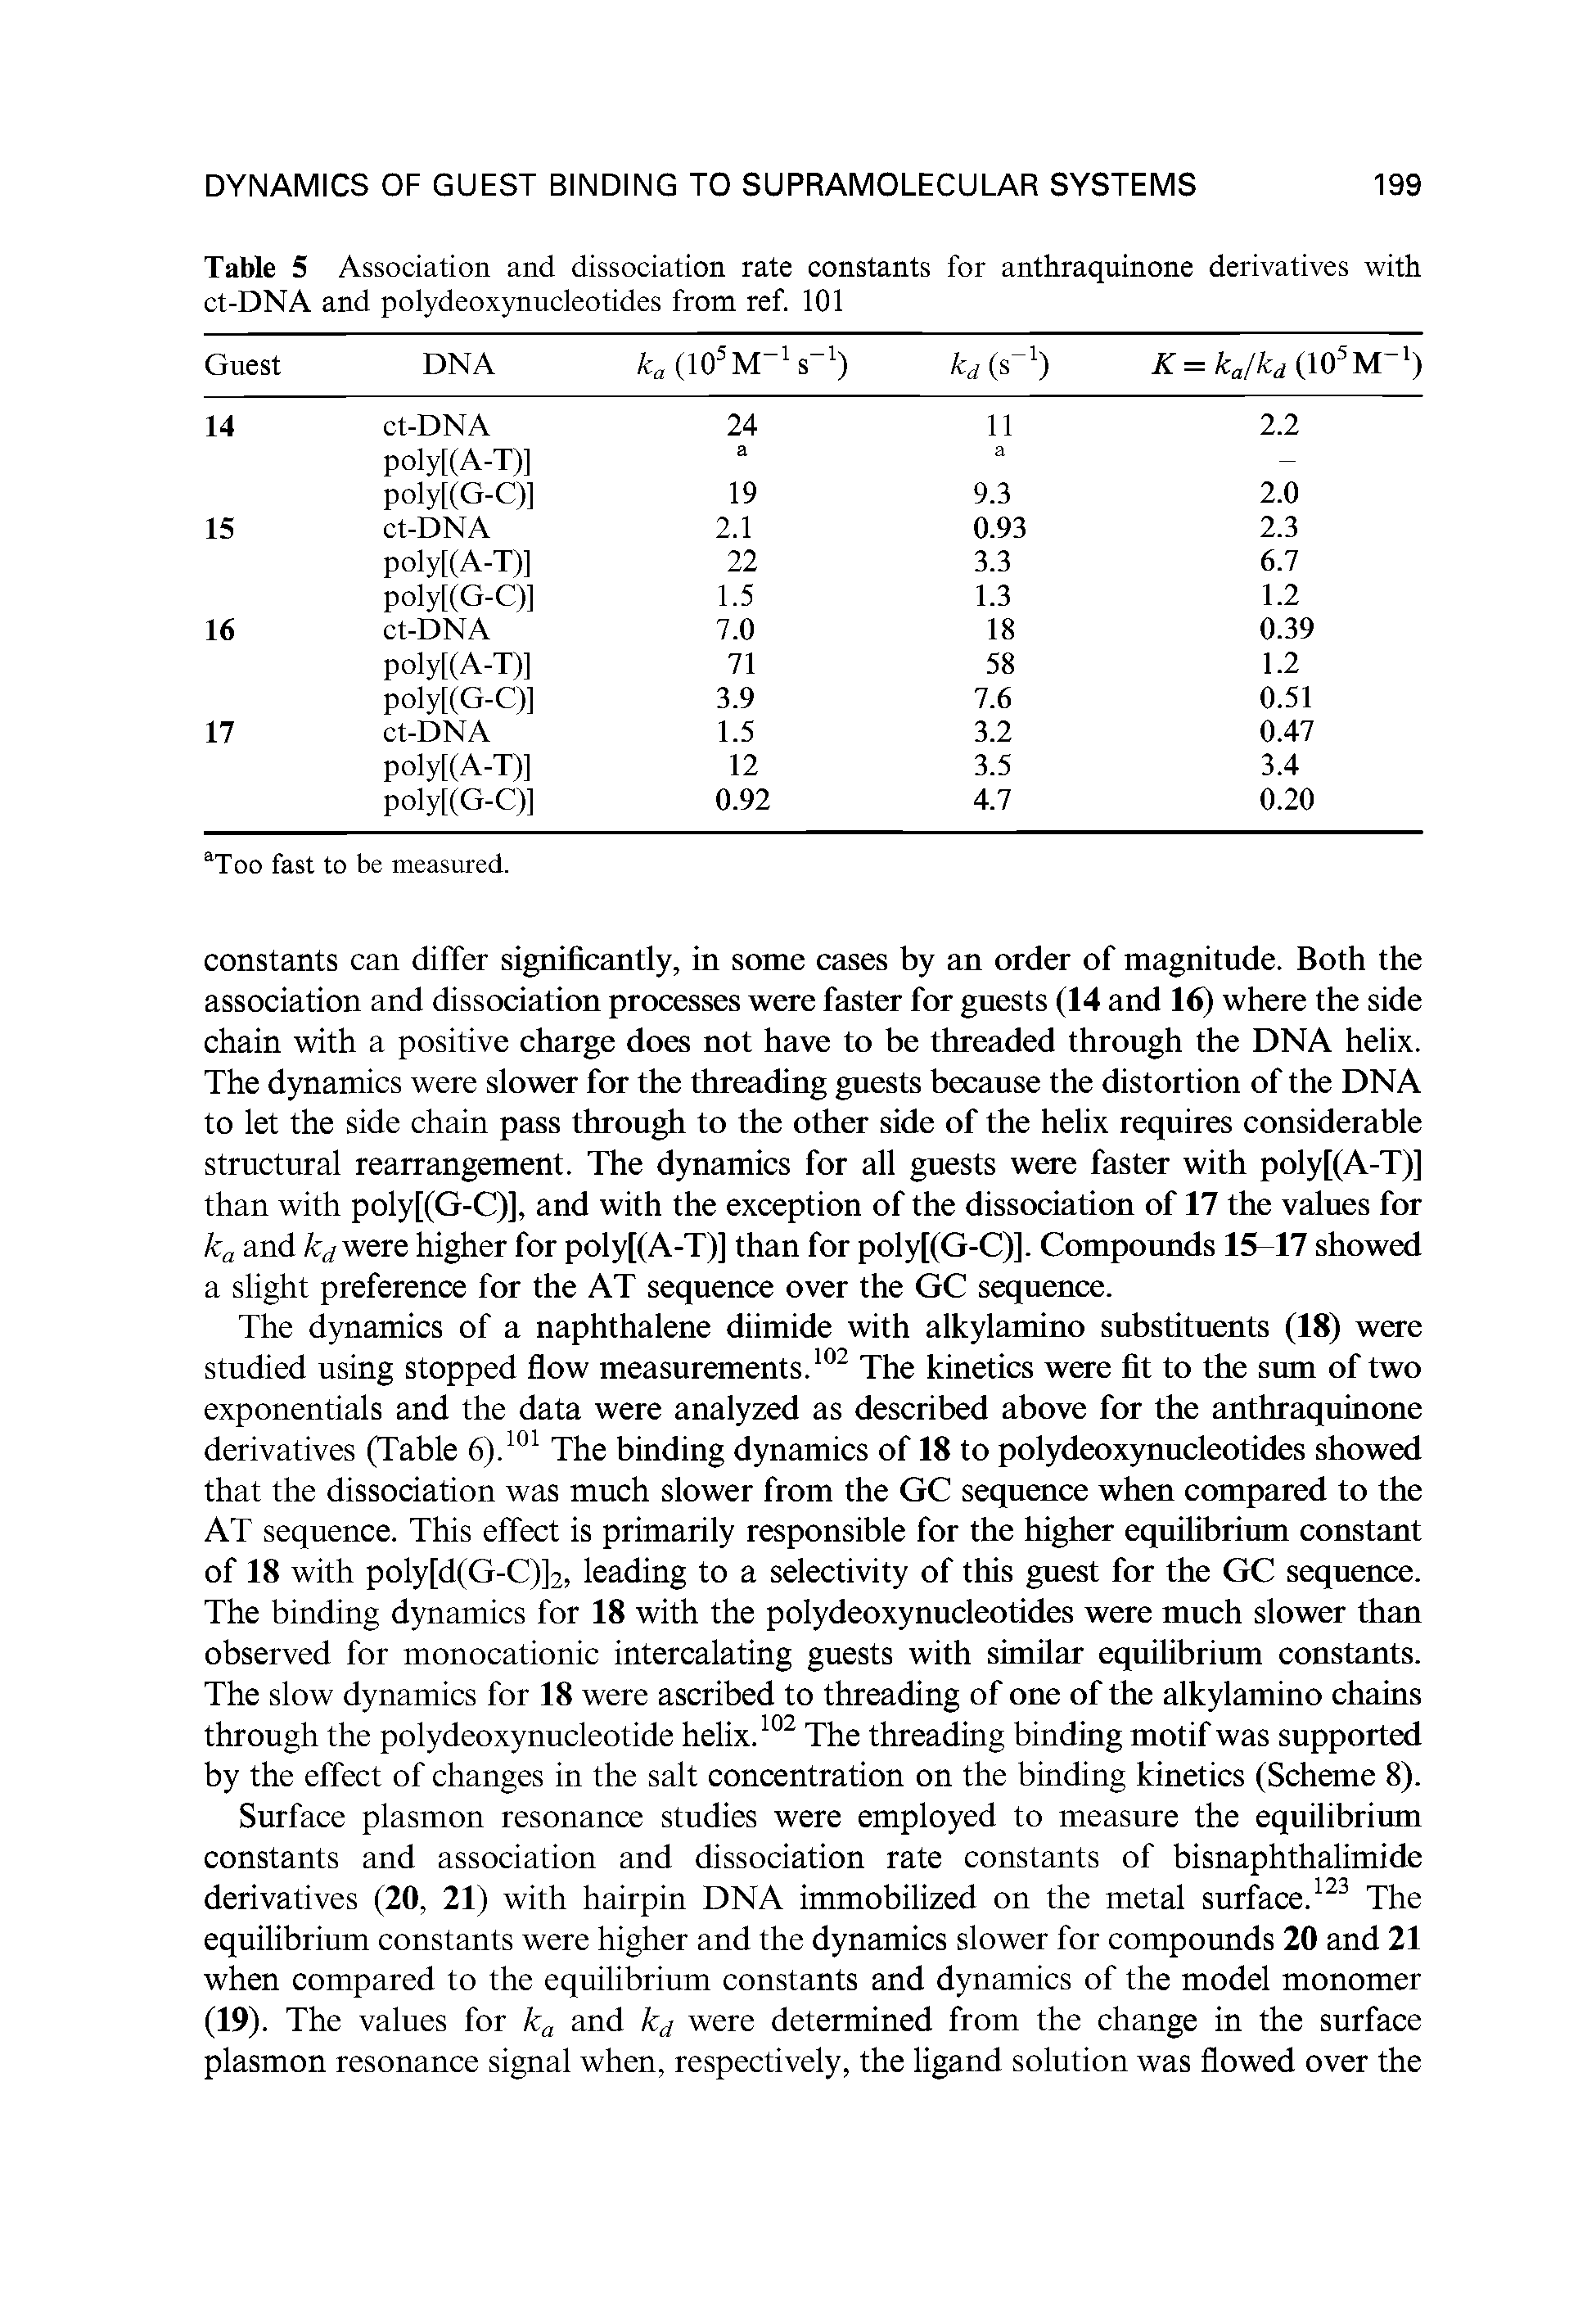 Table 5 Association and dissociation rate constants for anthraquinone derivatives with ct-DNA and polydeoxynucleotides from ref. 101...